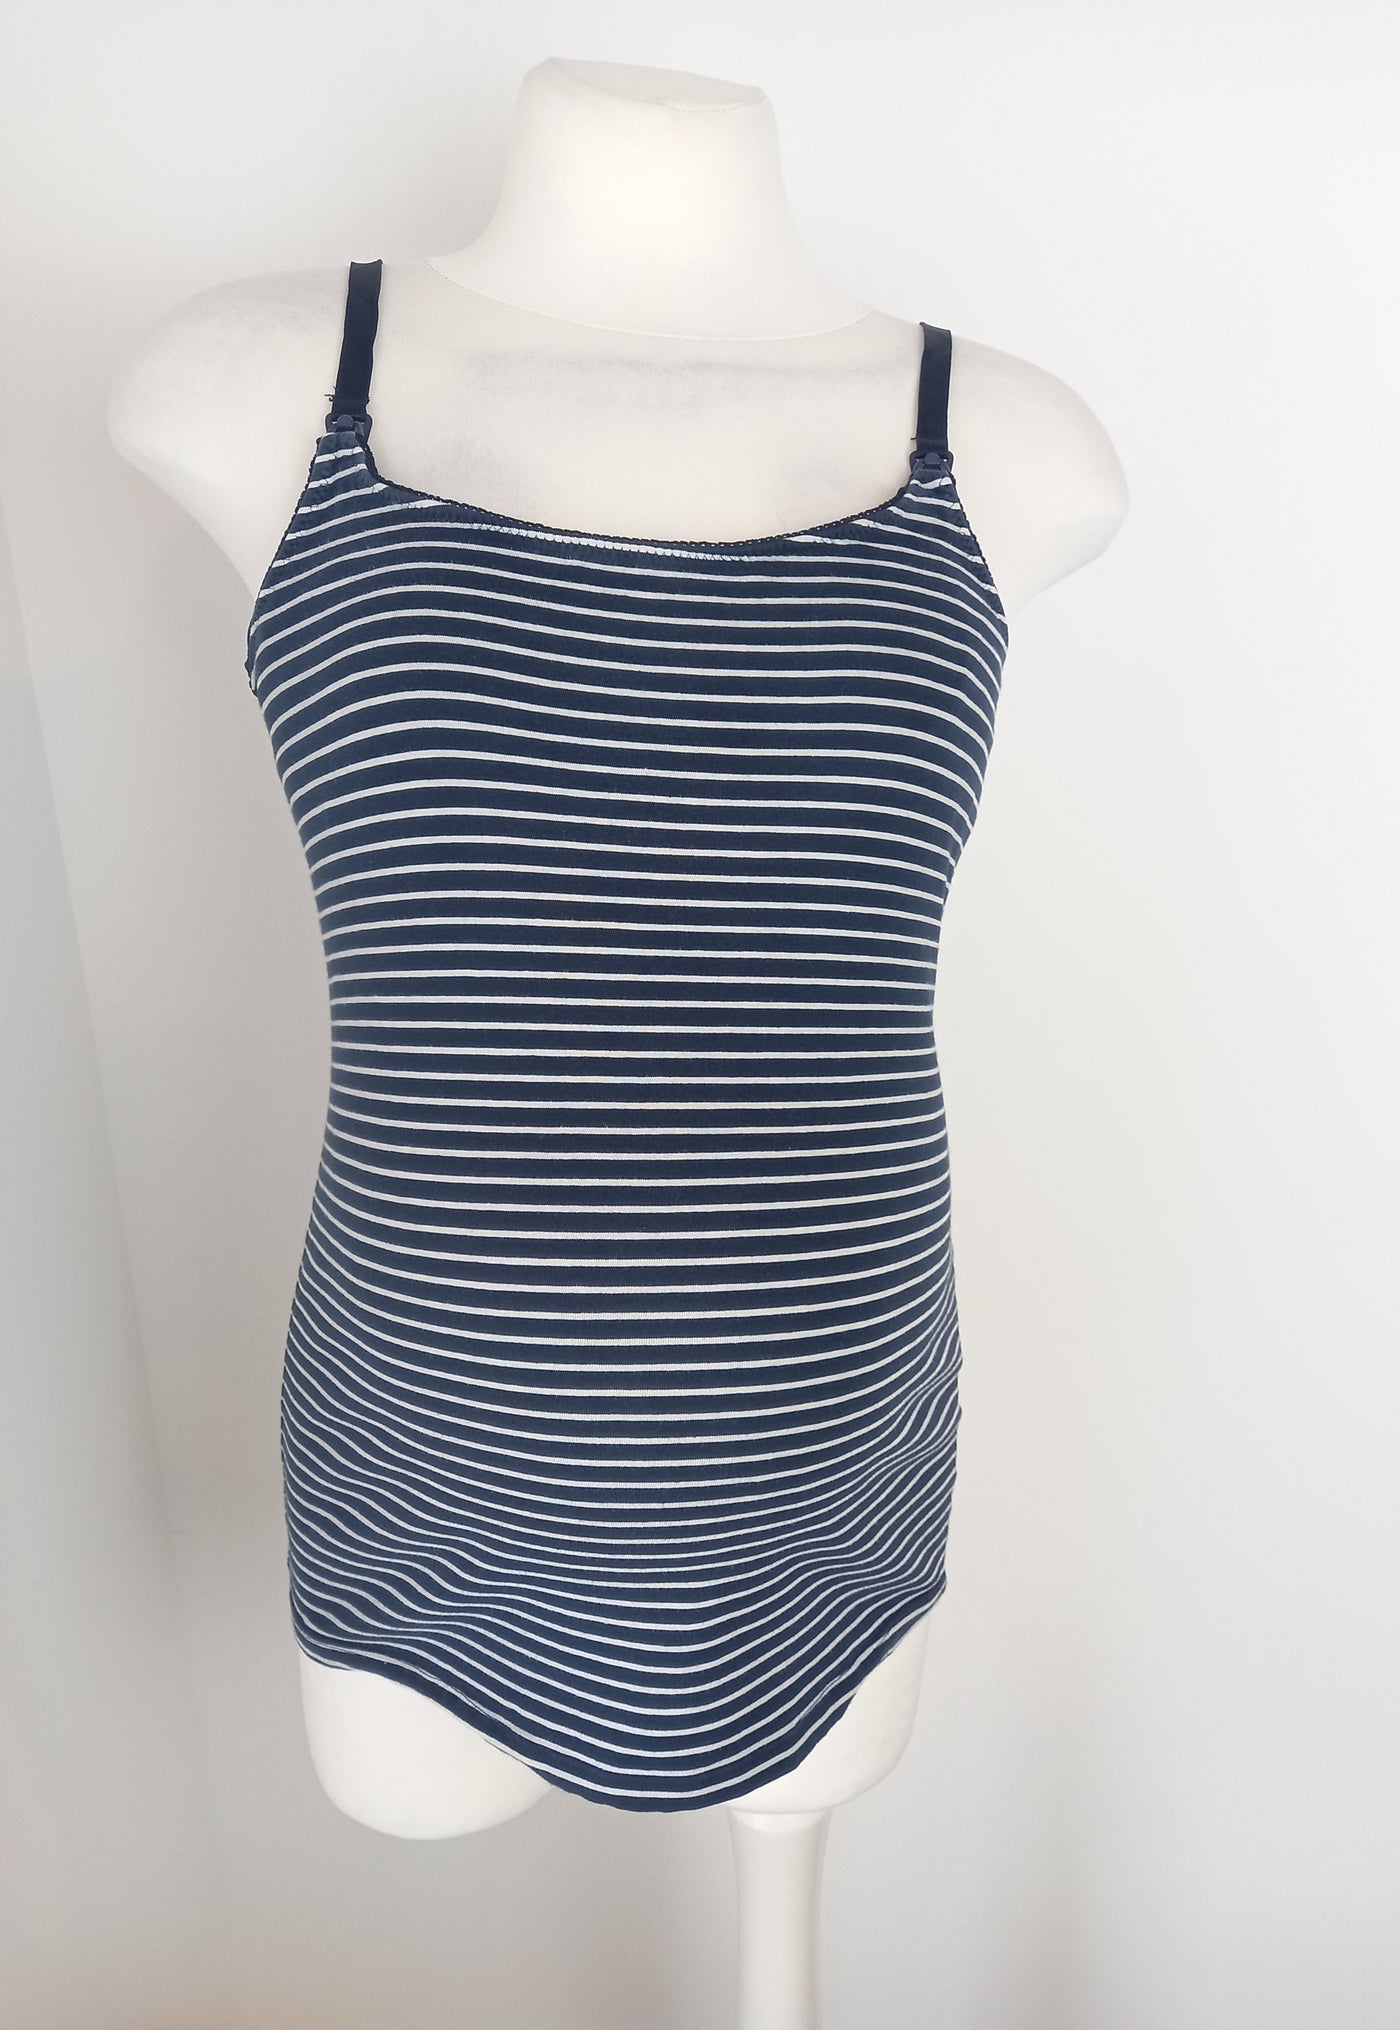 H&M Mama navy & white striped camisole nursing top - Size M (Approx UK 10/12)